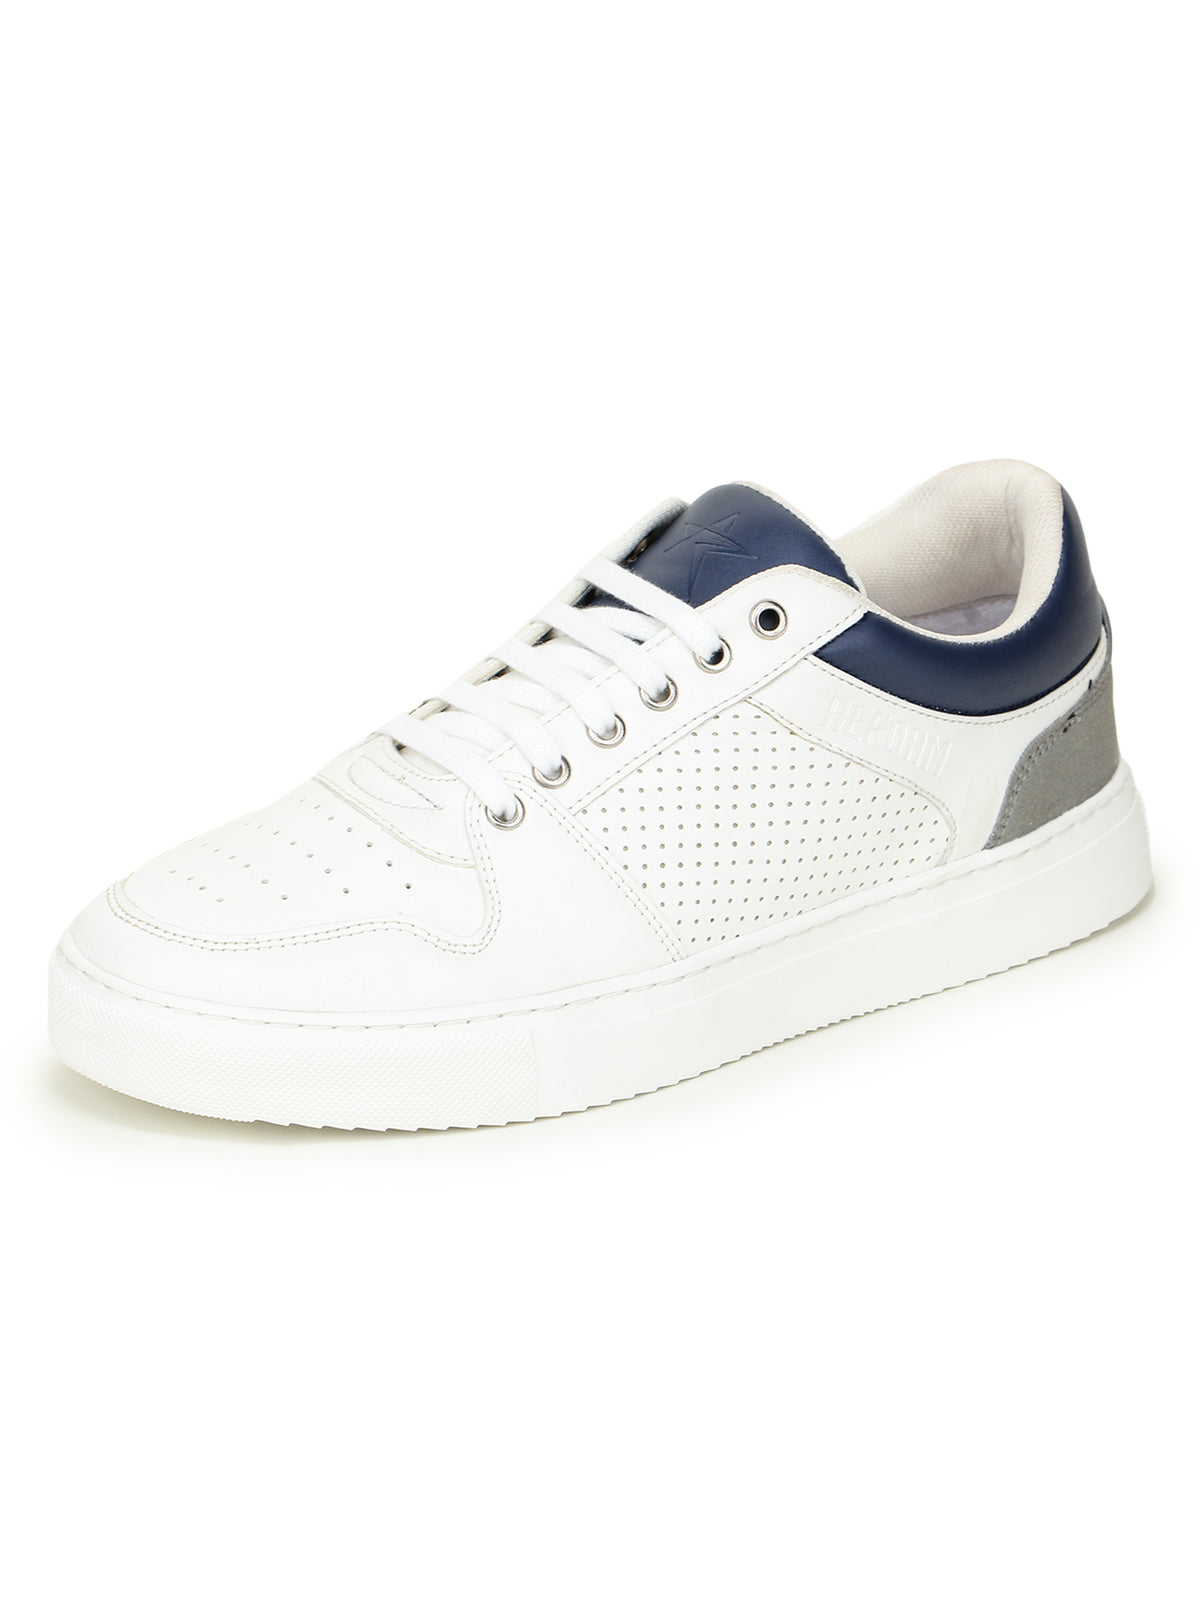 Buy Men's White Lightweight Casual Shoes Online in India at Bewakoof